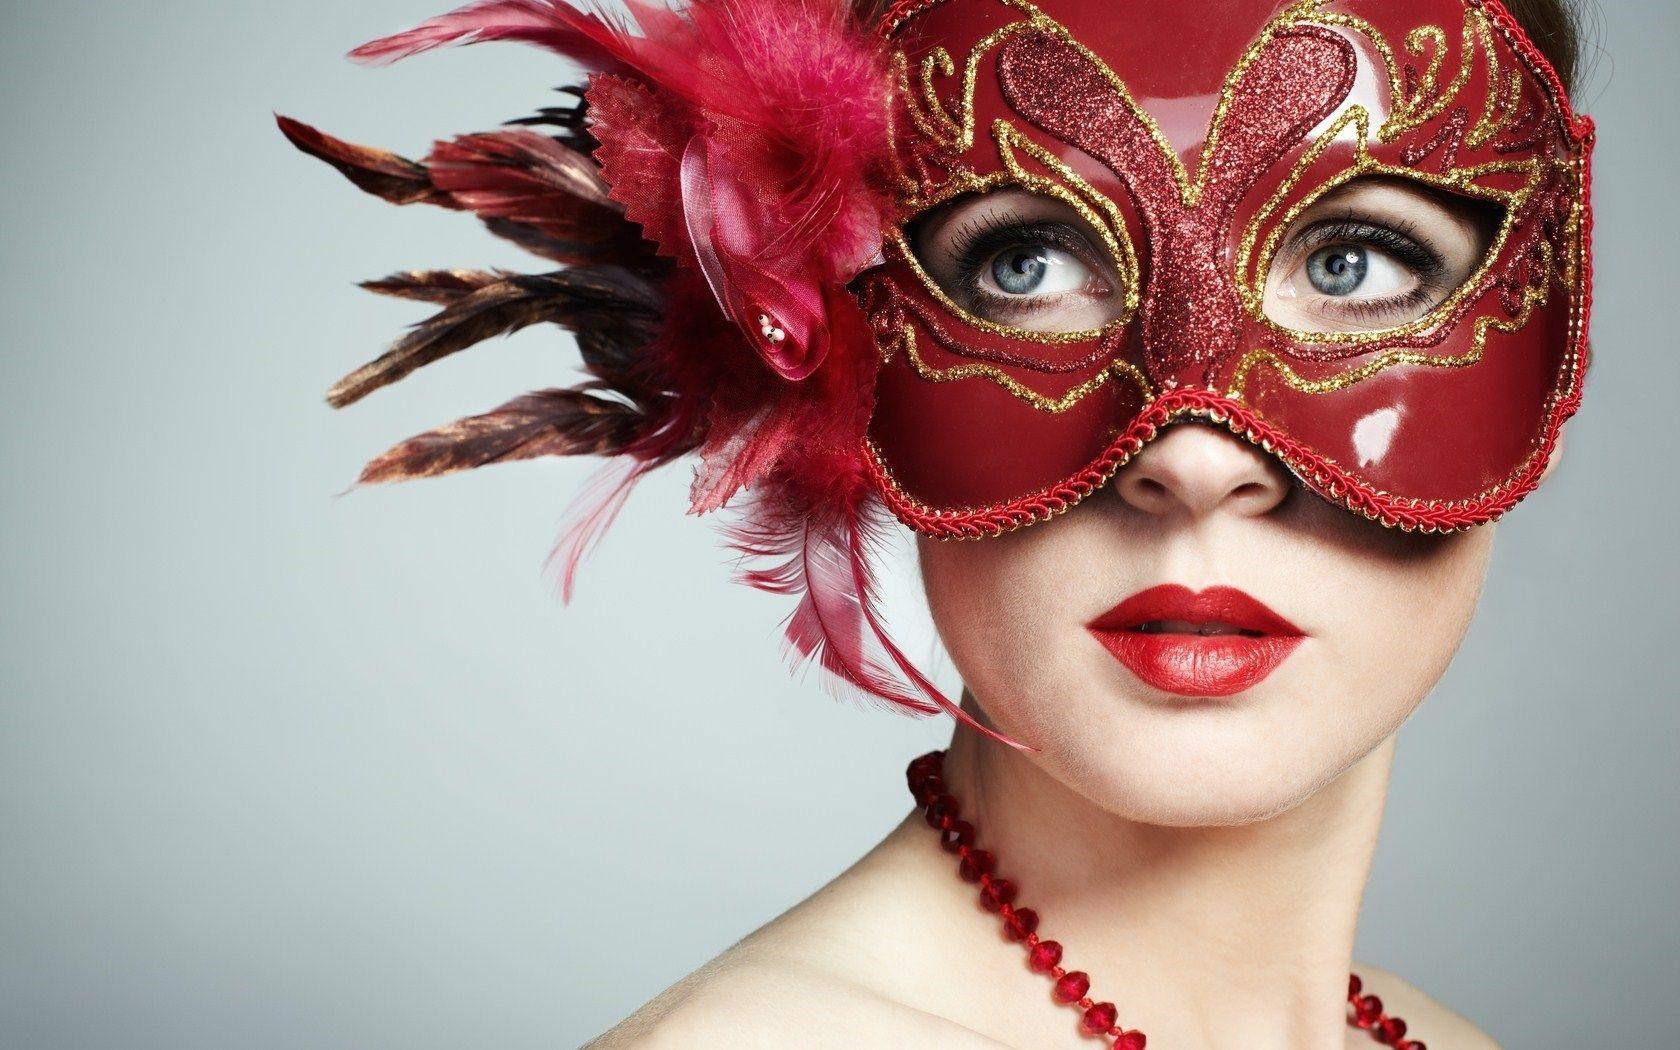 Girl Carnival Mask Red Lips Fashion Show HD Wallpaper. Red mask